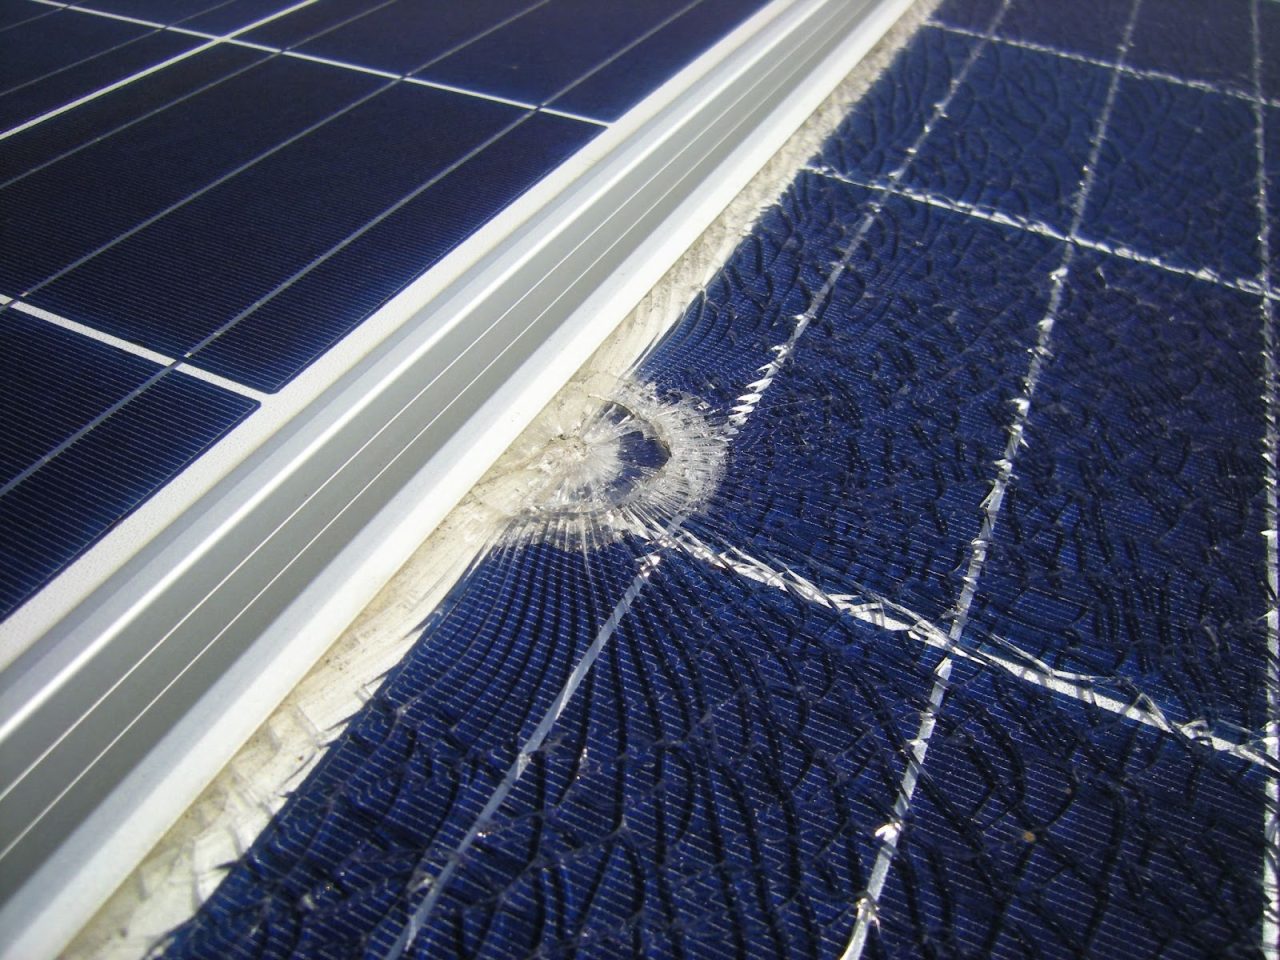 Cracked solar panel on roof